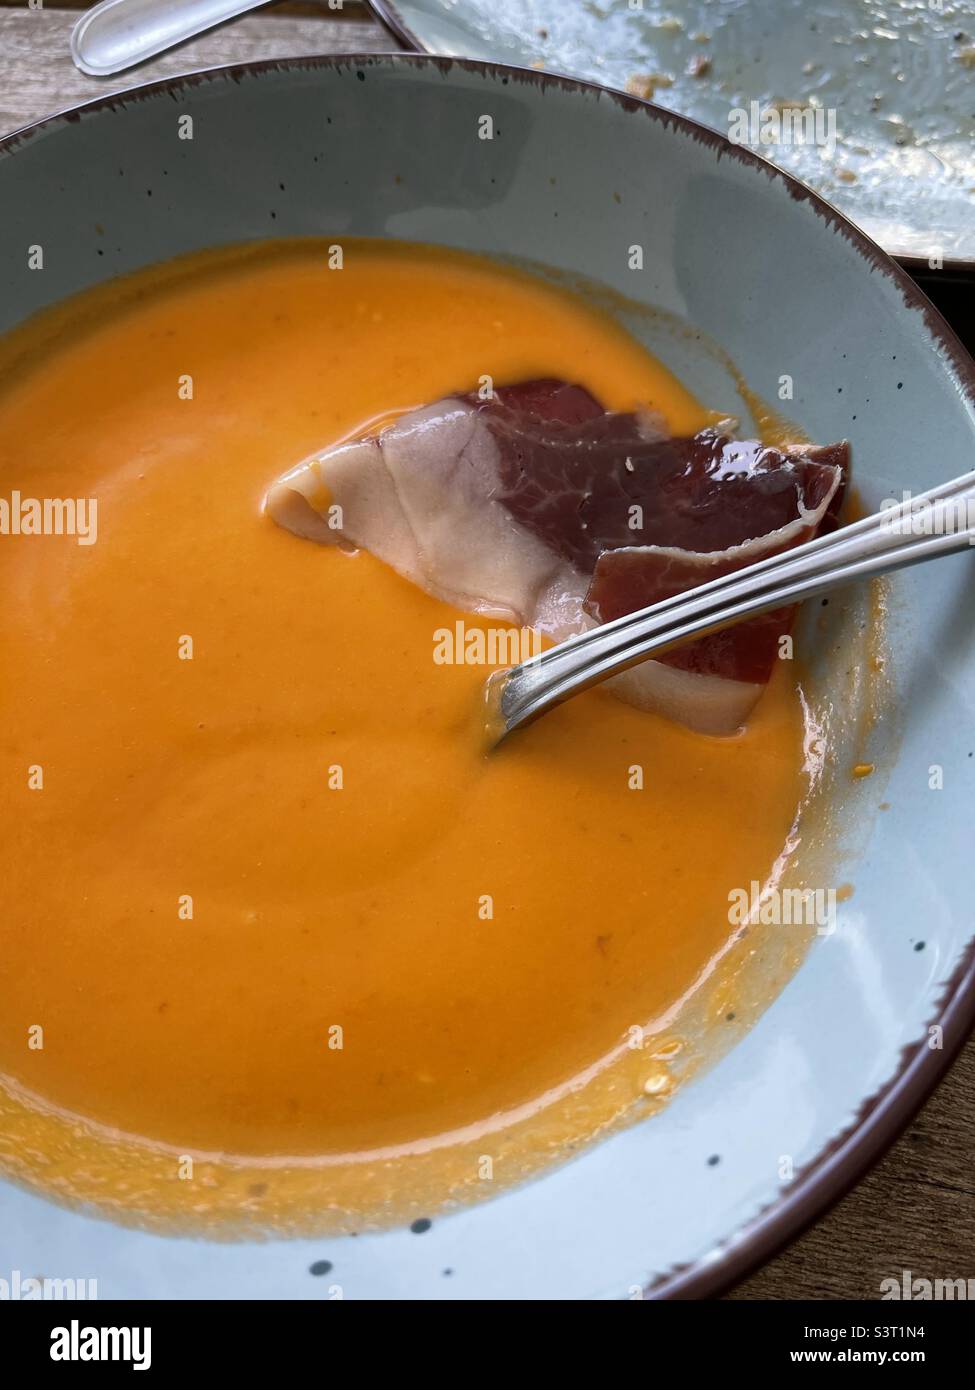 Salmorejo, traditional Andalusian soup served with Iberian ham Stock Photo